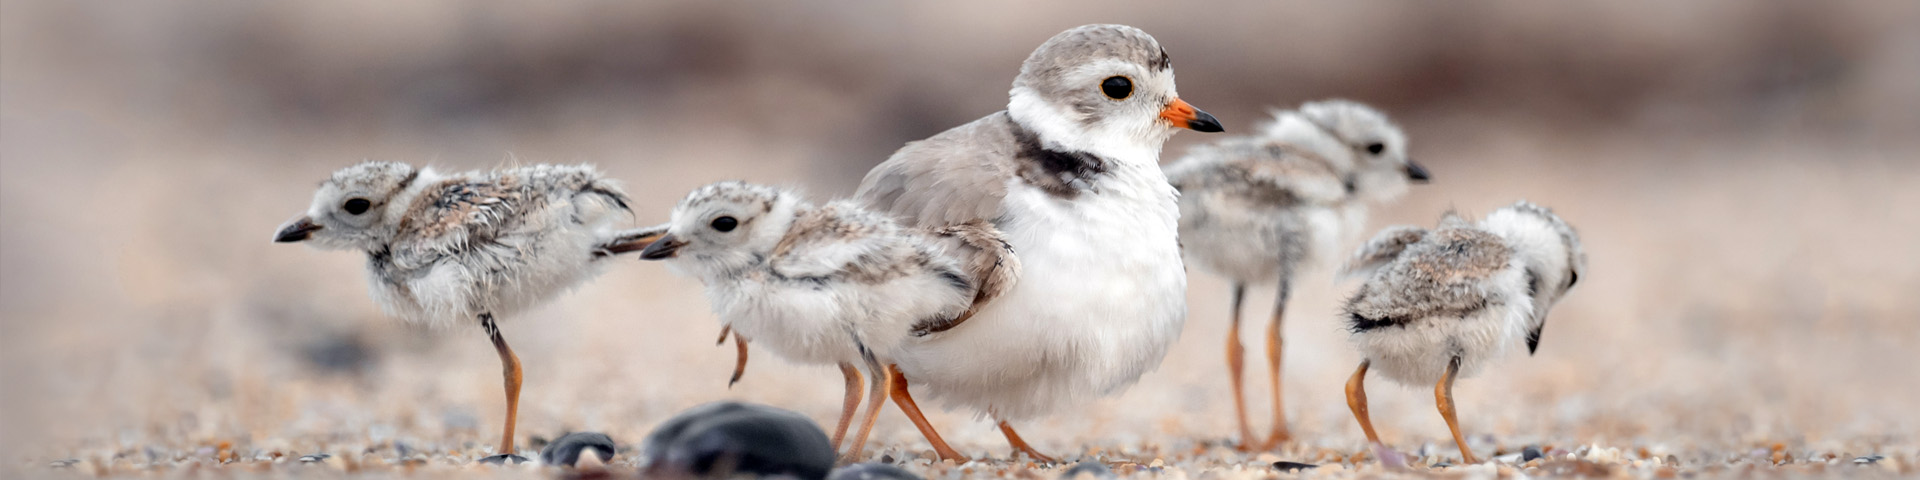 Four piping plover chicks standing on the sand with an adult piping plover.